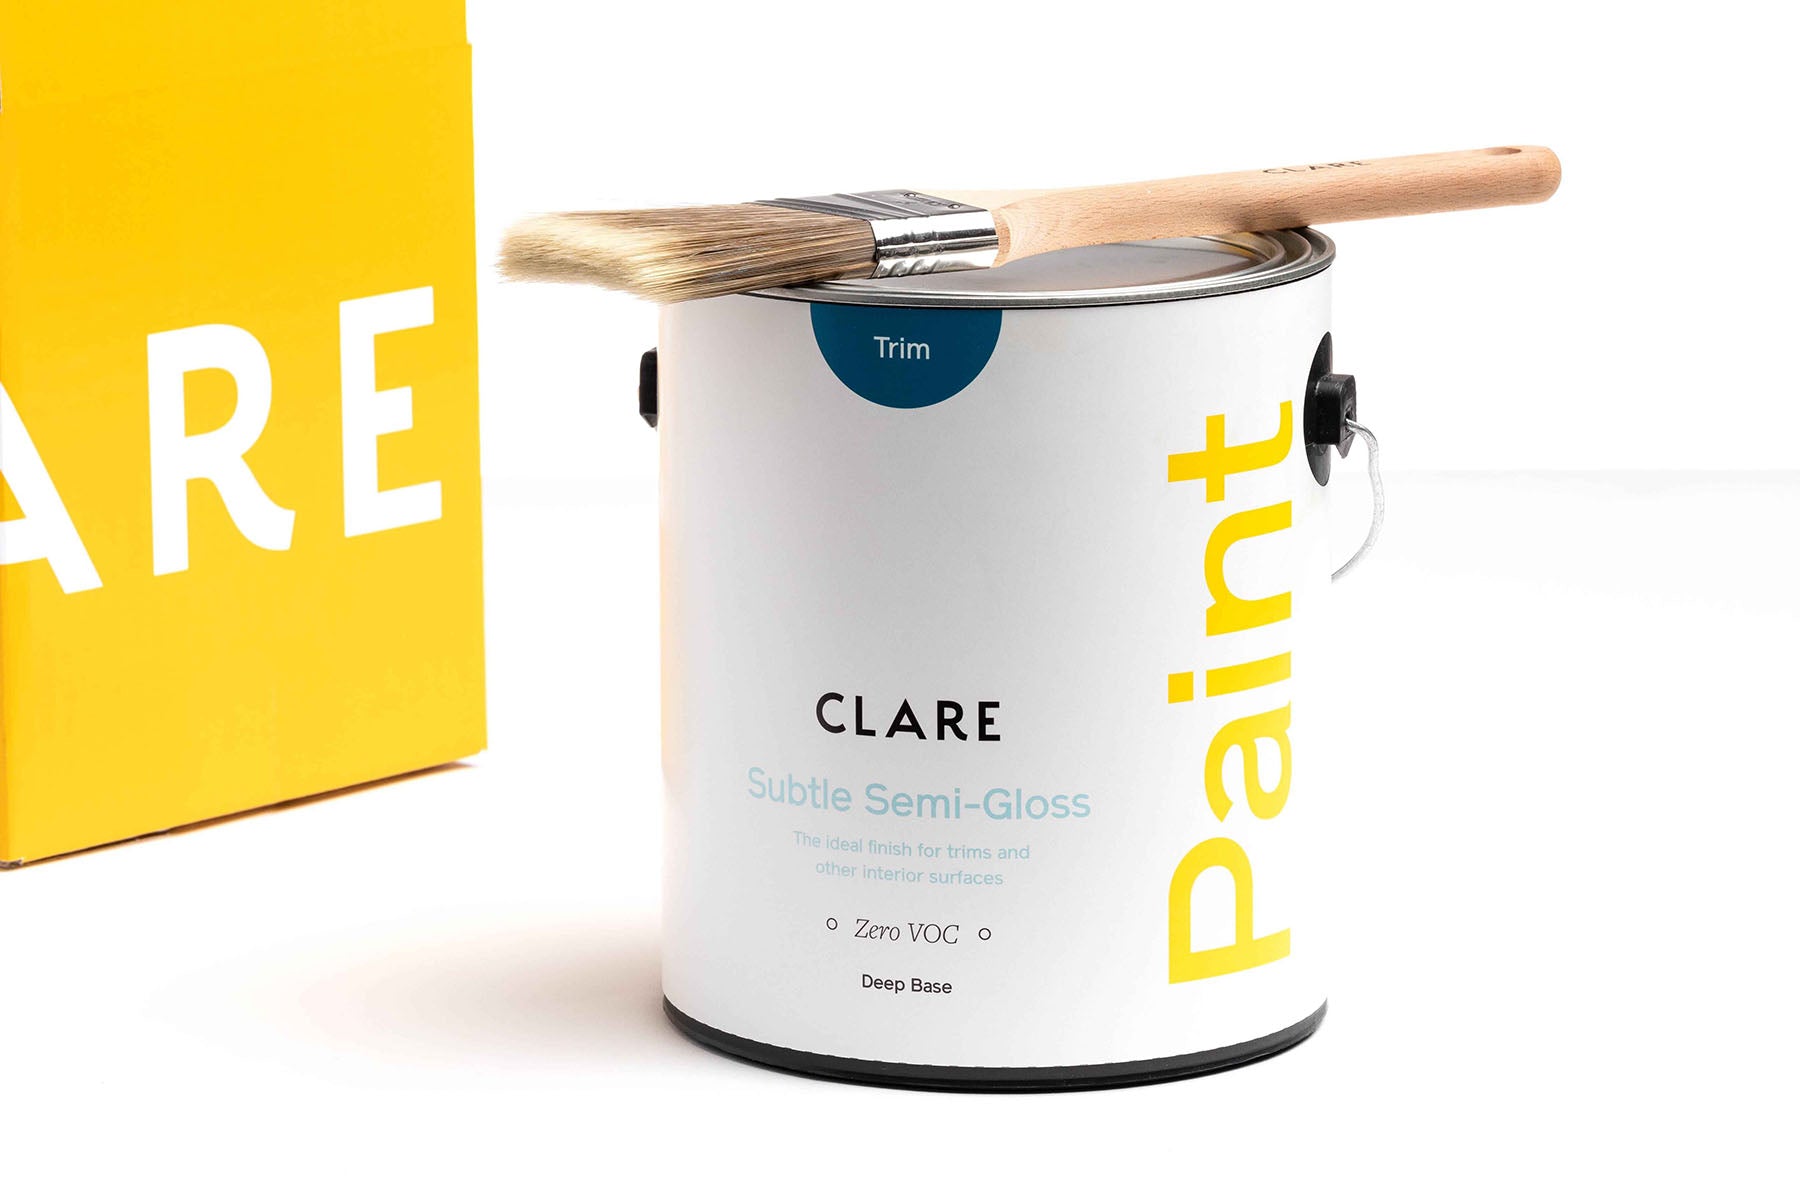 We have everything you need to paint trim like a pro. Read the best tips and advice on painting trim at Clare.com.